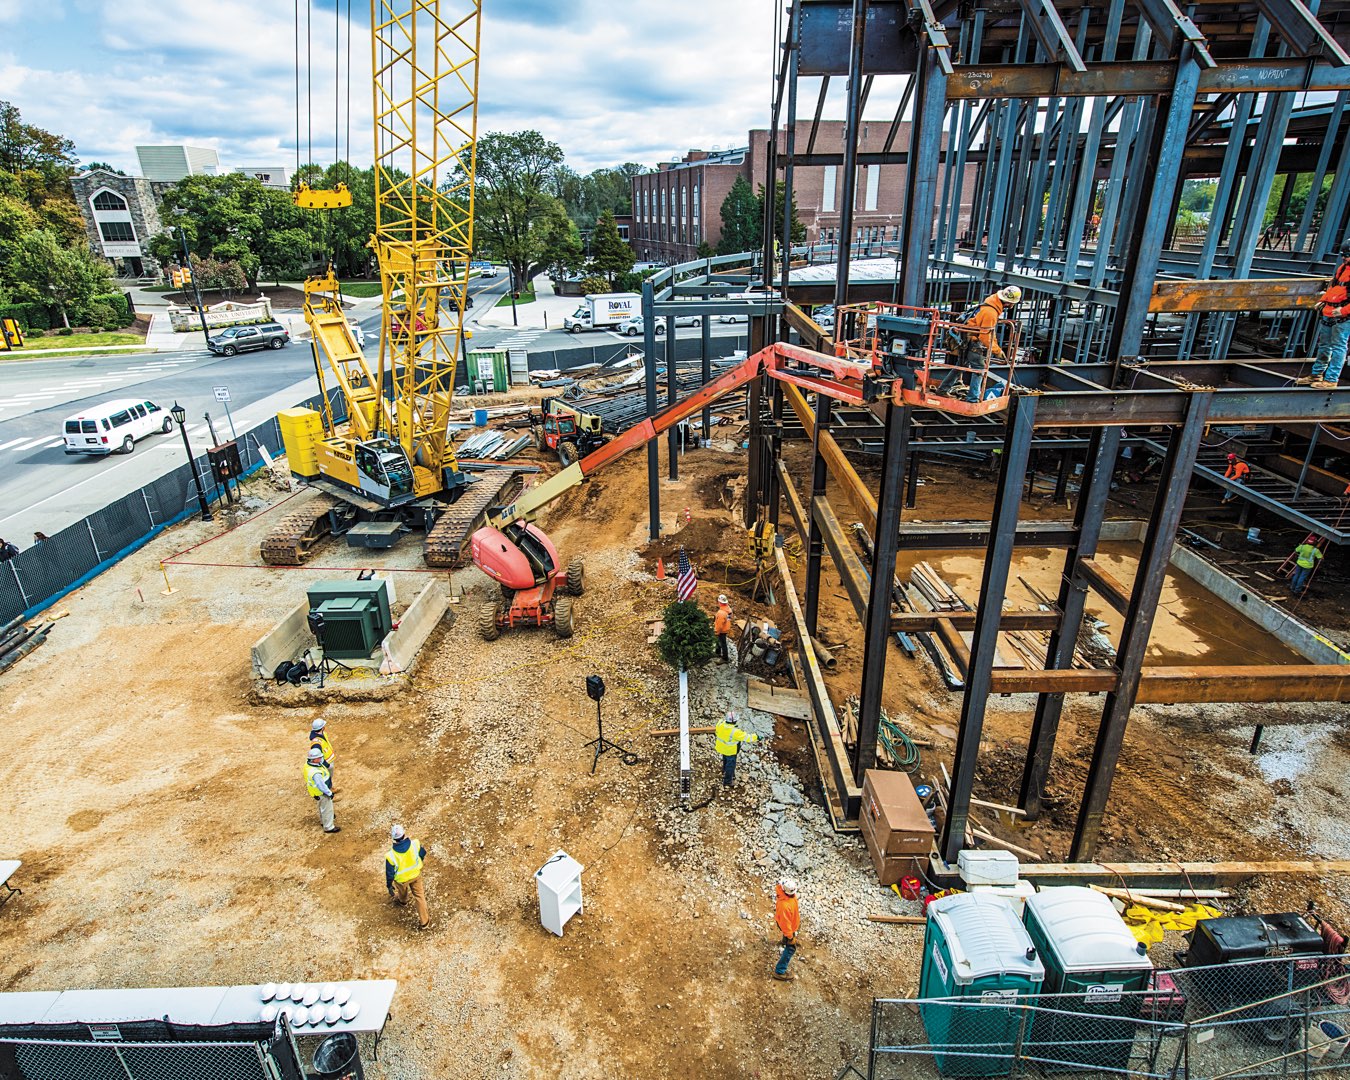 Construction workers and vehicles on site building the steel beam infrastructure for the future Performing Arts Center